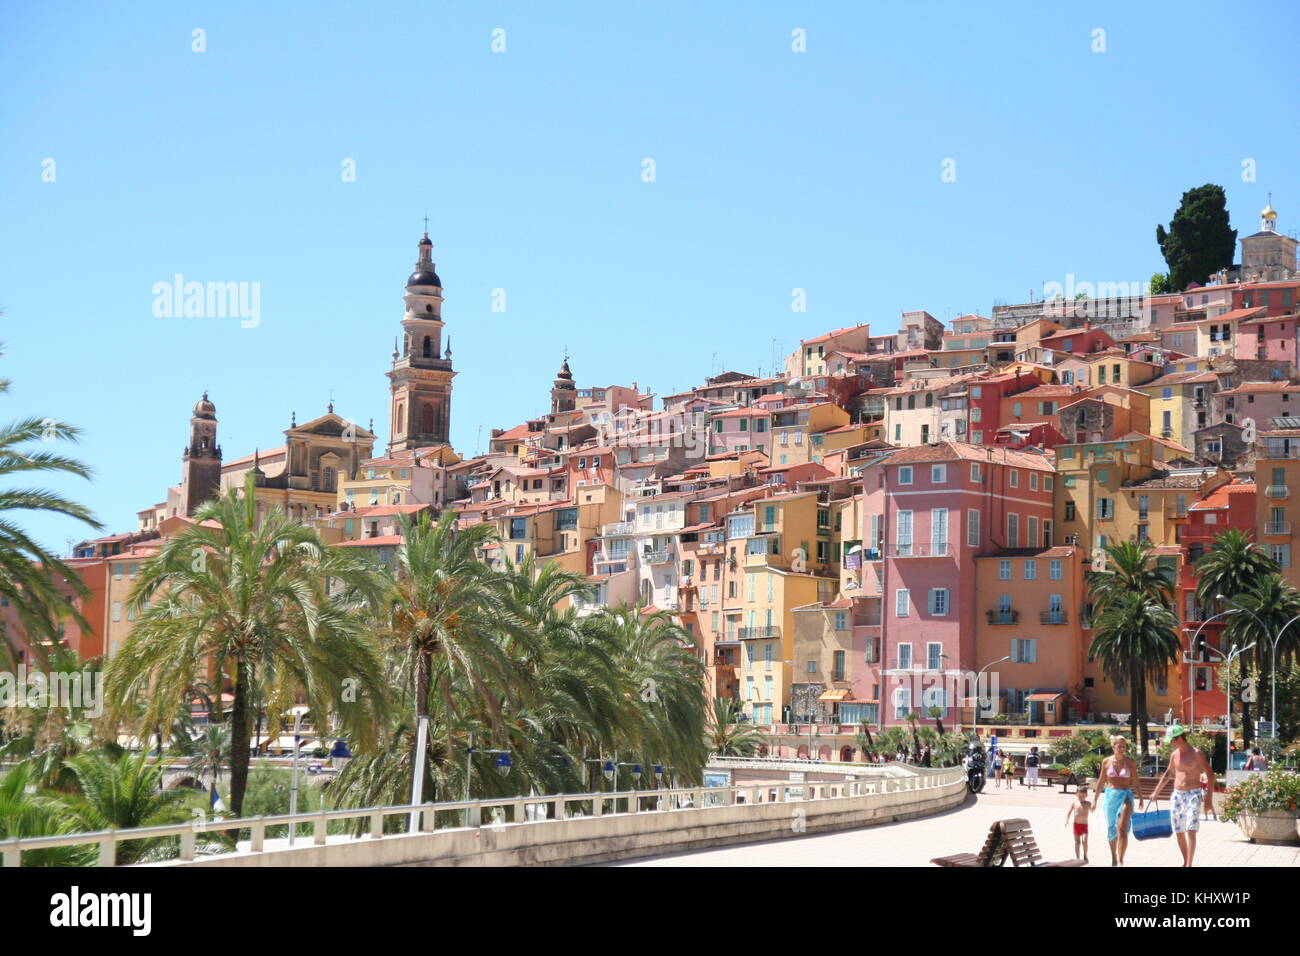 Family on Vacation enjoy a stroll along the promenade at Menton in the South of France. Stock Photo